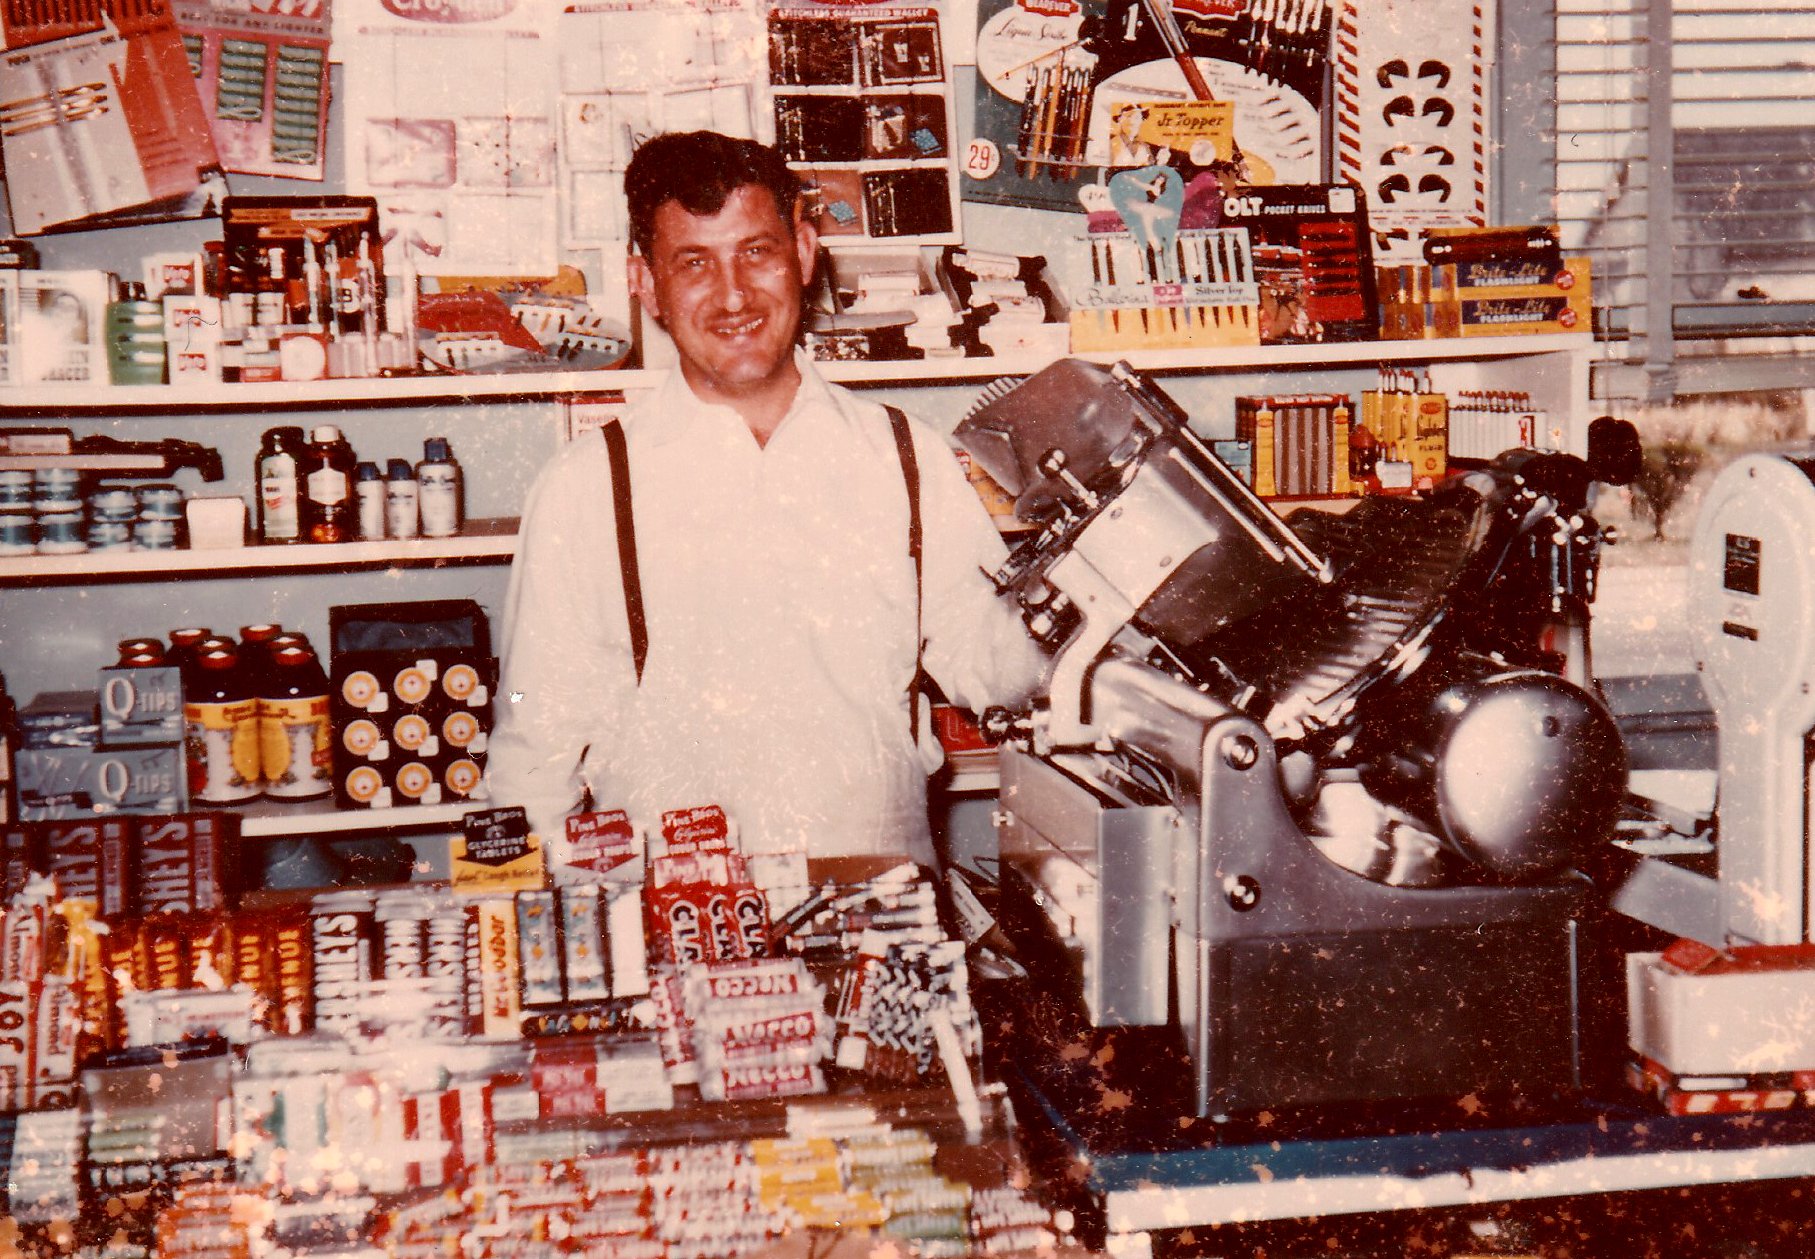 Sam’s was a legendary stop for candy by locals. Here’s Sam behind his candy counter in 1956.